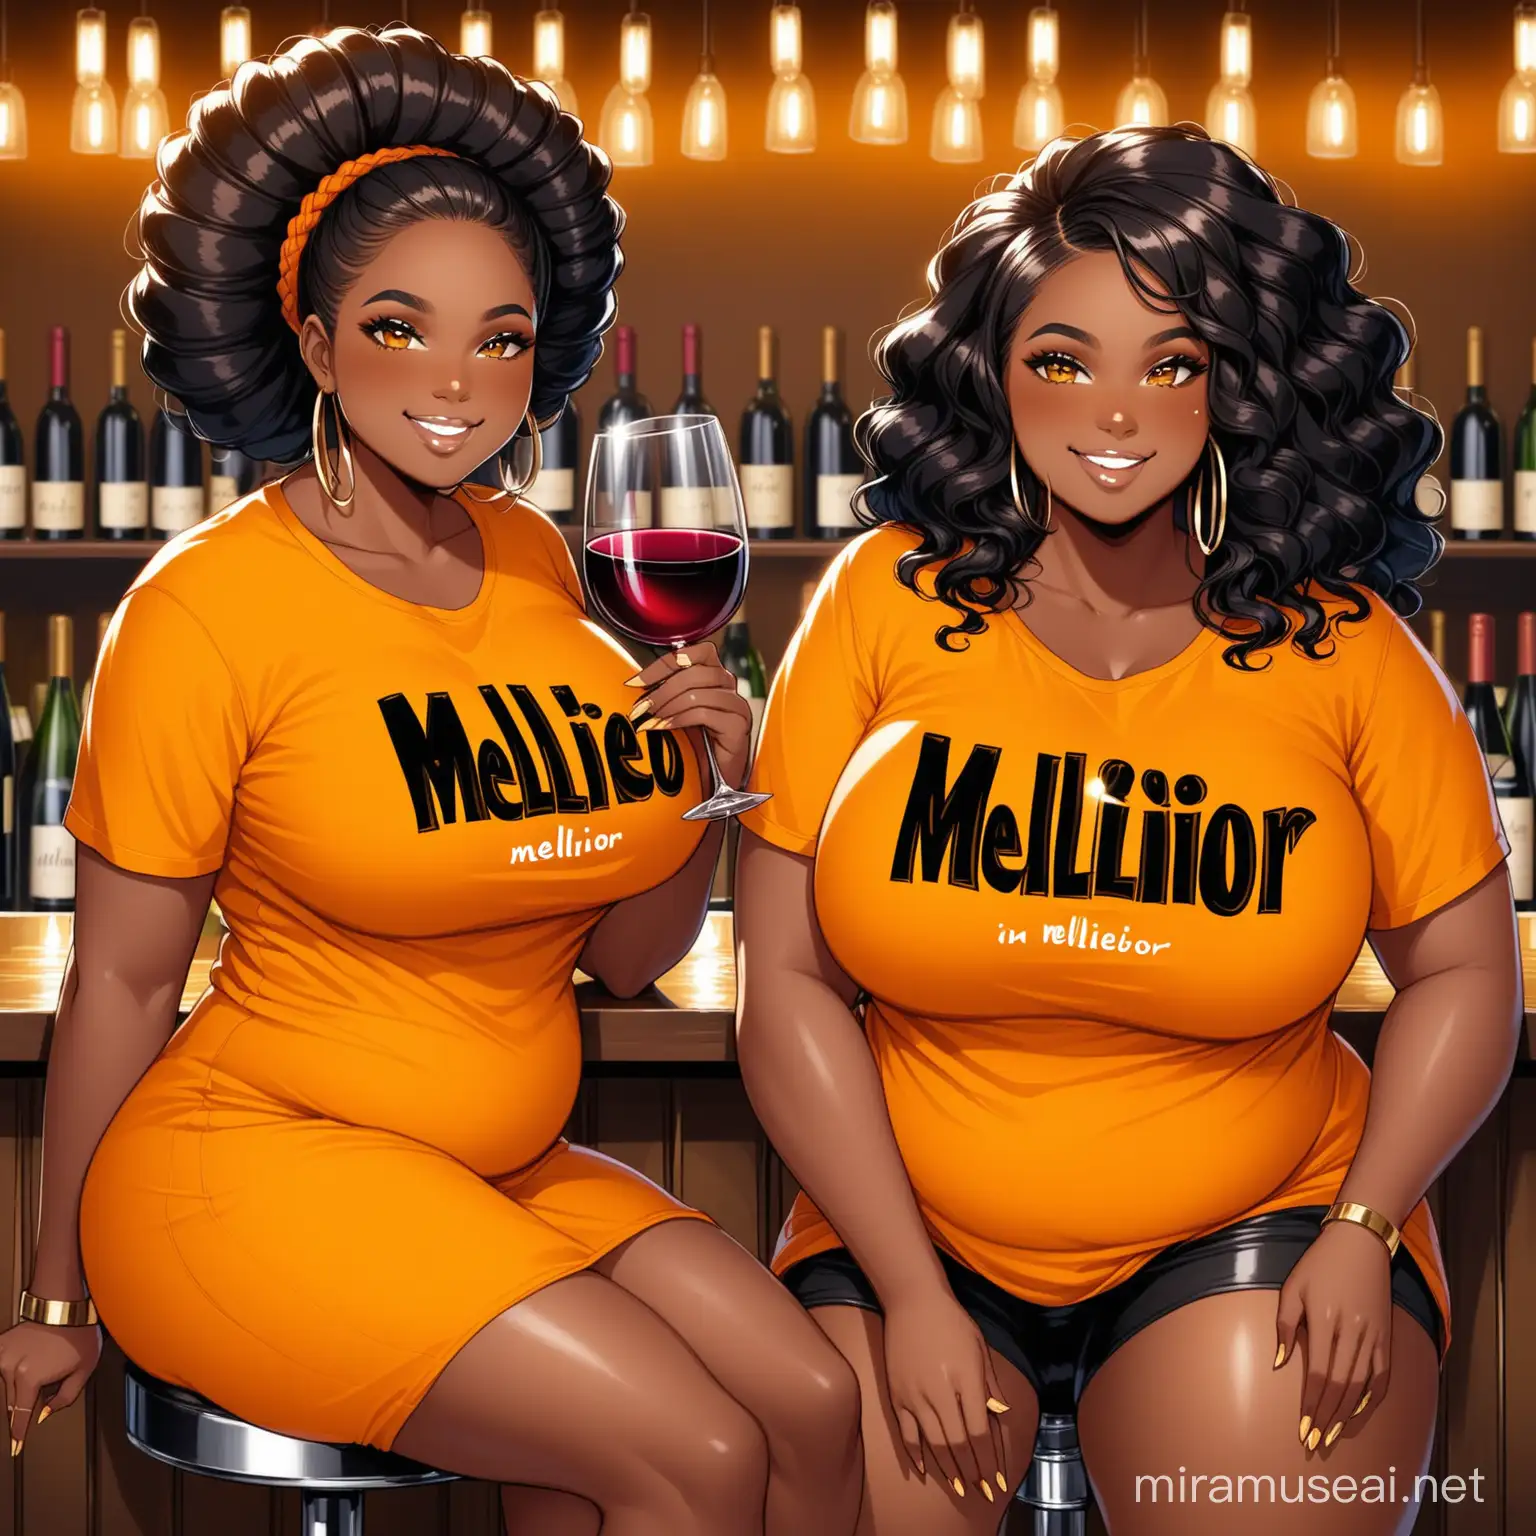 fat beautiful dark skin girls, 2 shades of dark skin, African hairstyles, rich, Pretty black woman, wearing a orange shirt with the words MellieBIOR written in black on the shirt, sitting on a bar stool smiling, wine glass in hand, with long beautiful black hair